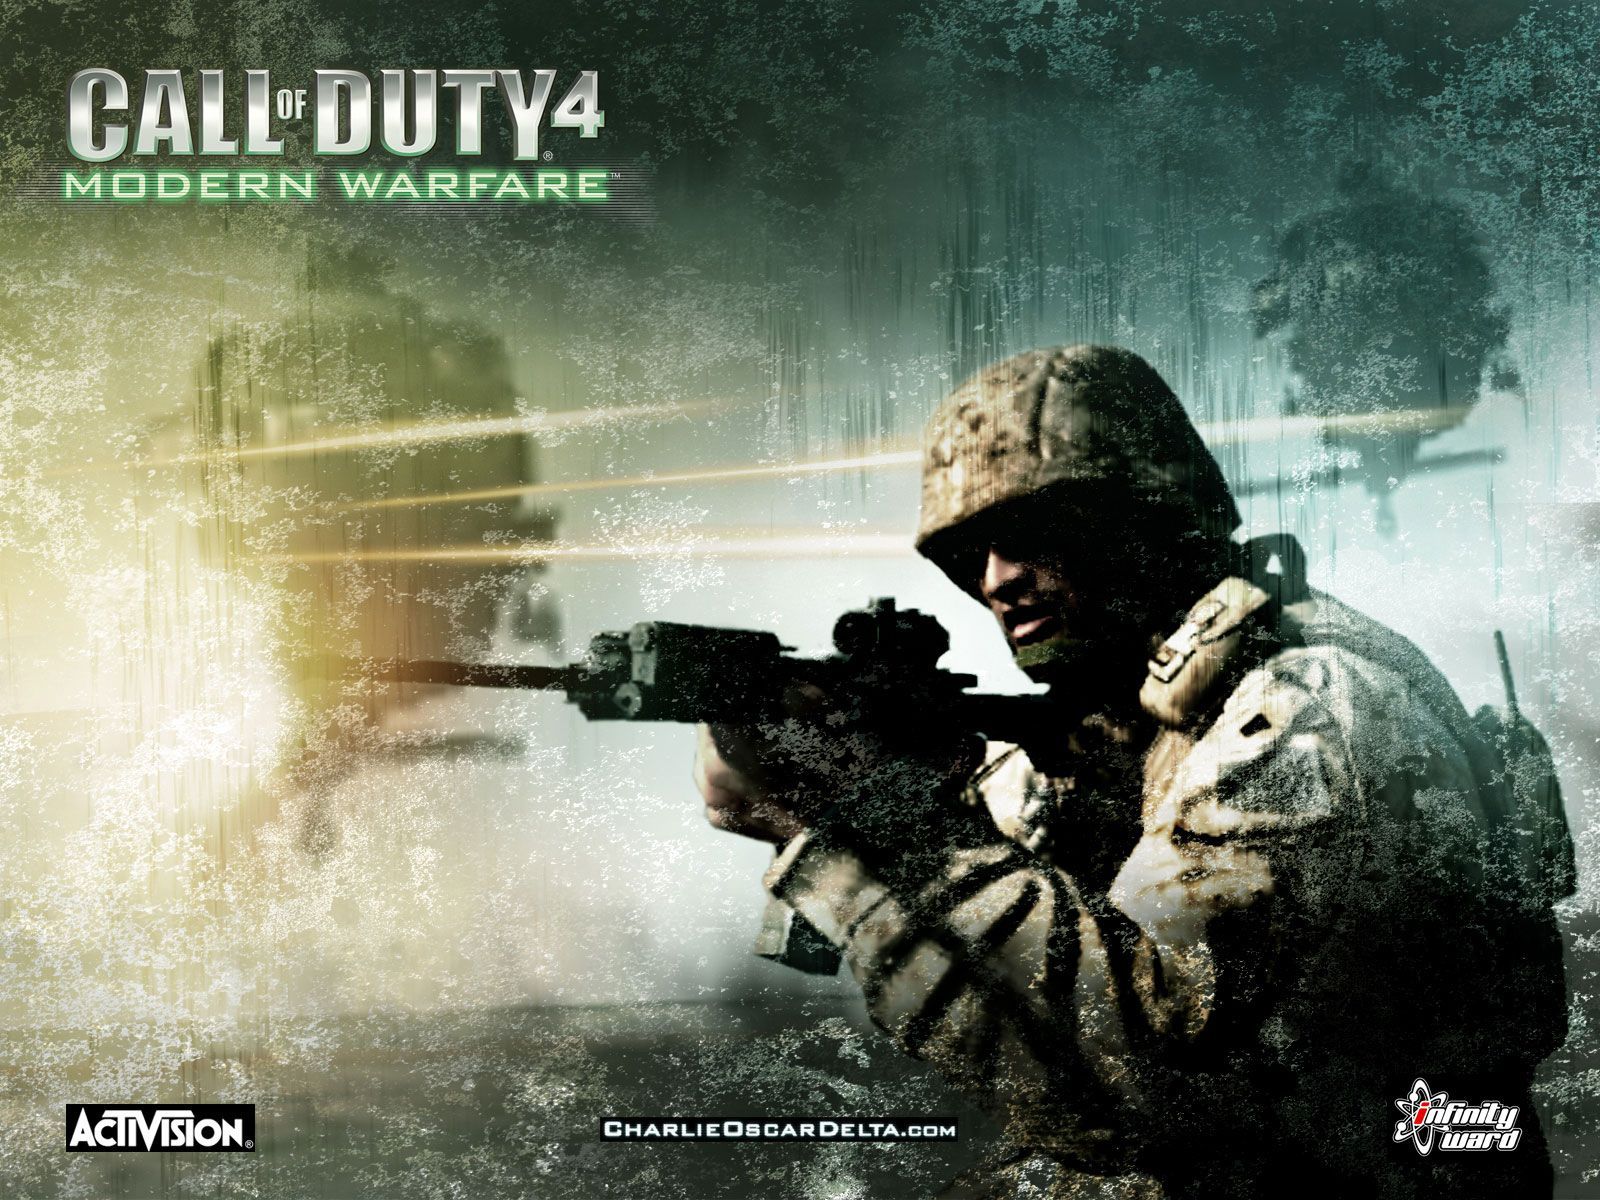 call of duty 4 desktop wallpapers | Call of Duty 4 Wallpapers ...